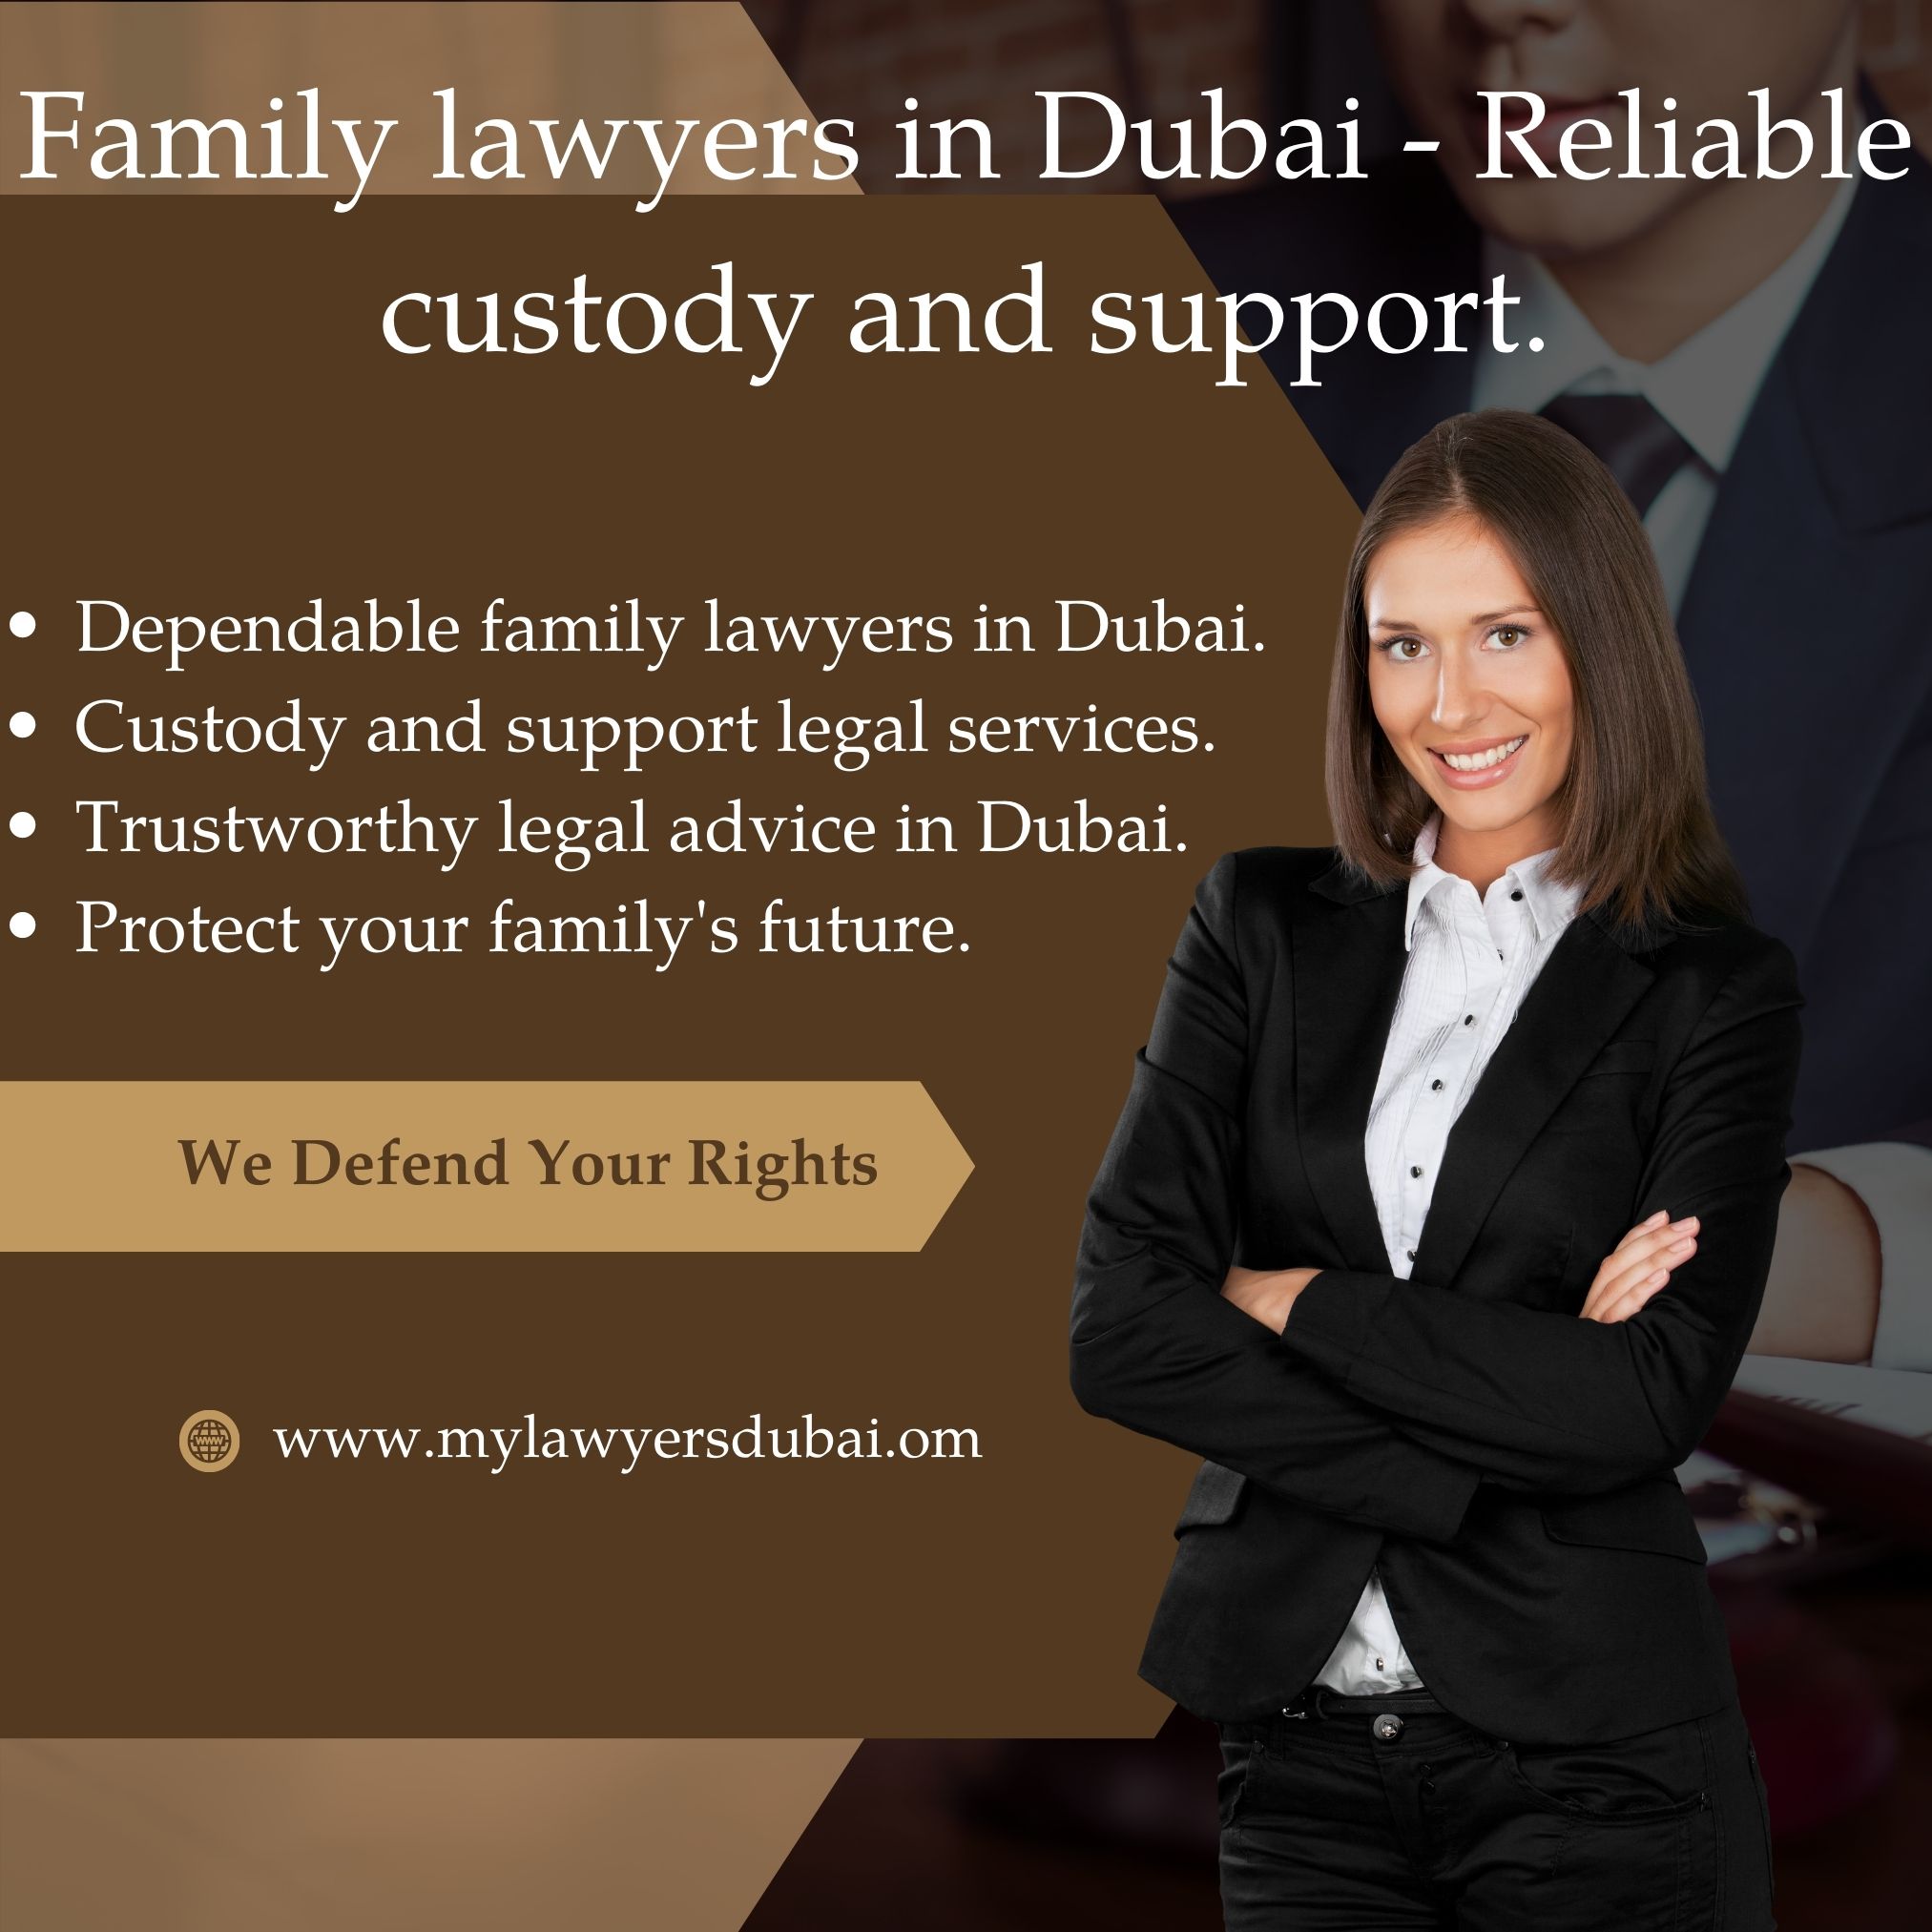 Reliable Family Lawyers in Dubai for Custody and Support